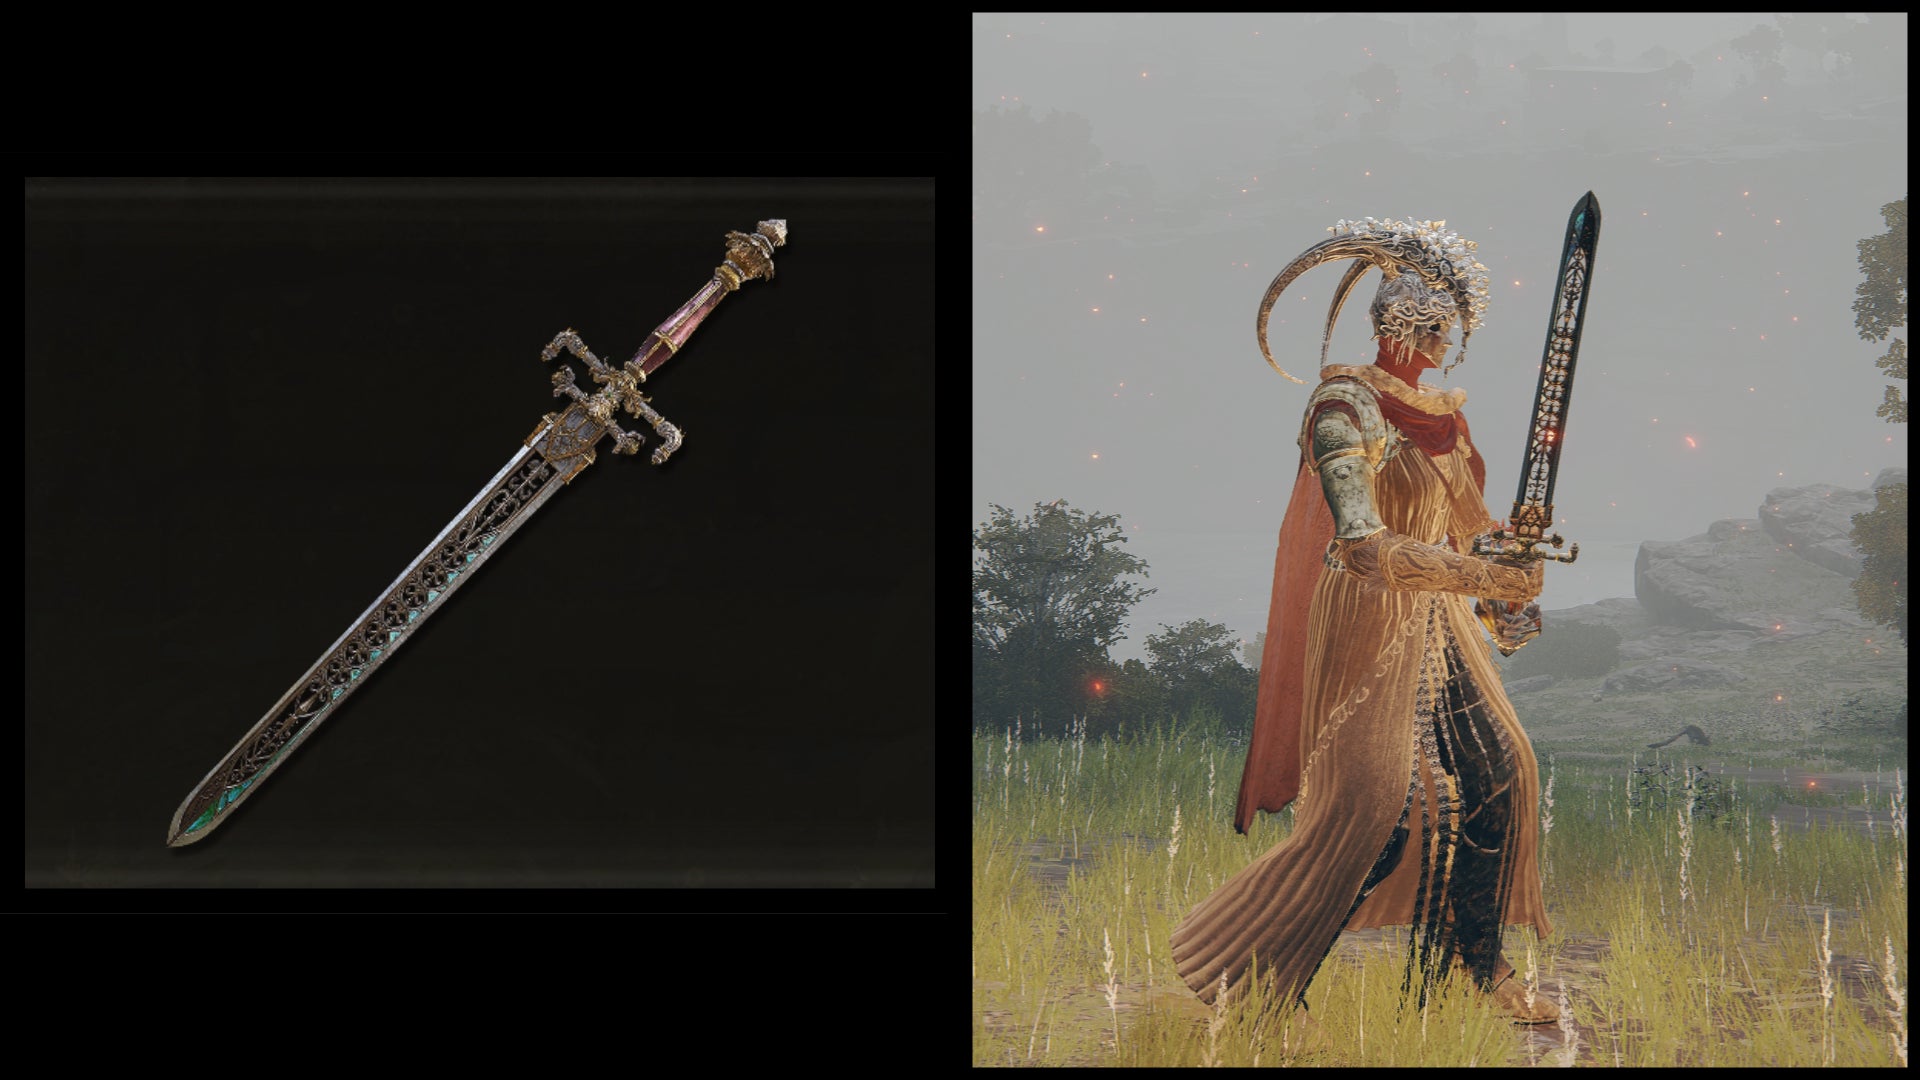 Left: an illustration of the Sword of Night and Flame from Elden Ring. Right: the player character holding the same weapon against a Limgrave background.